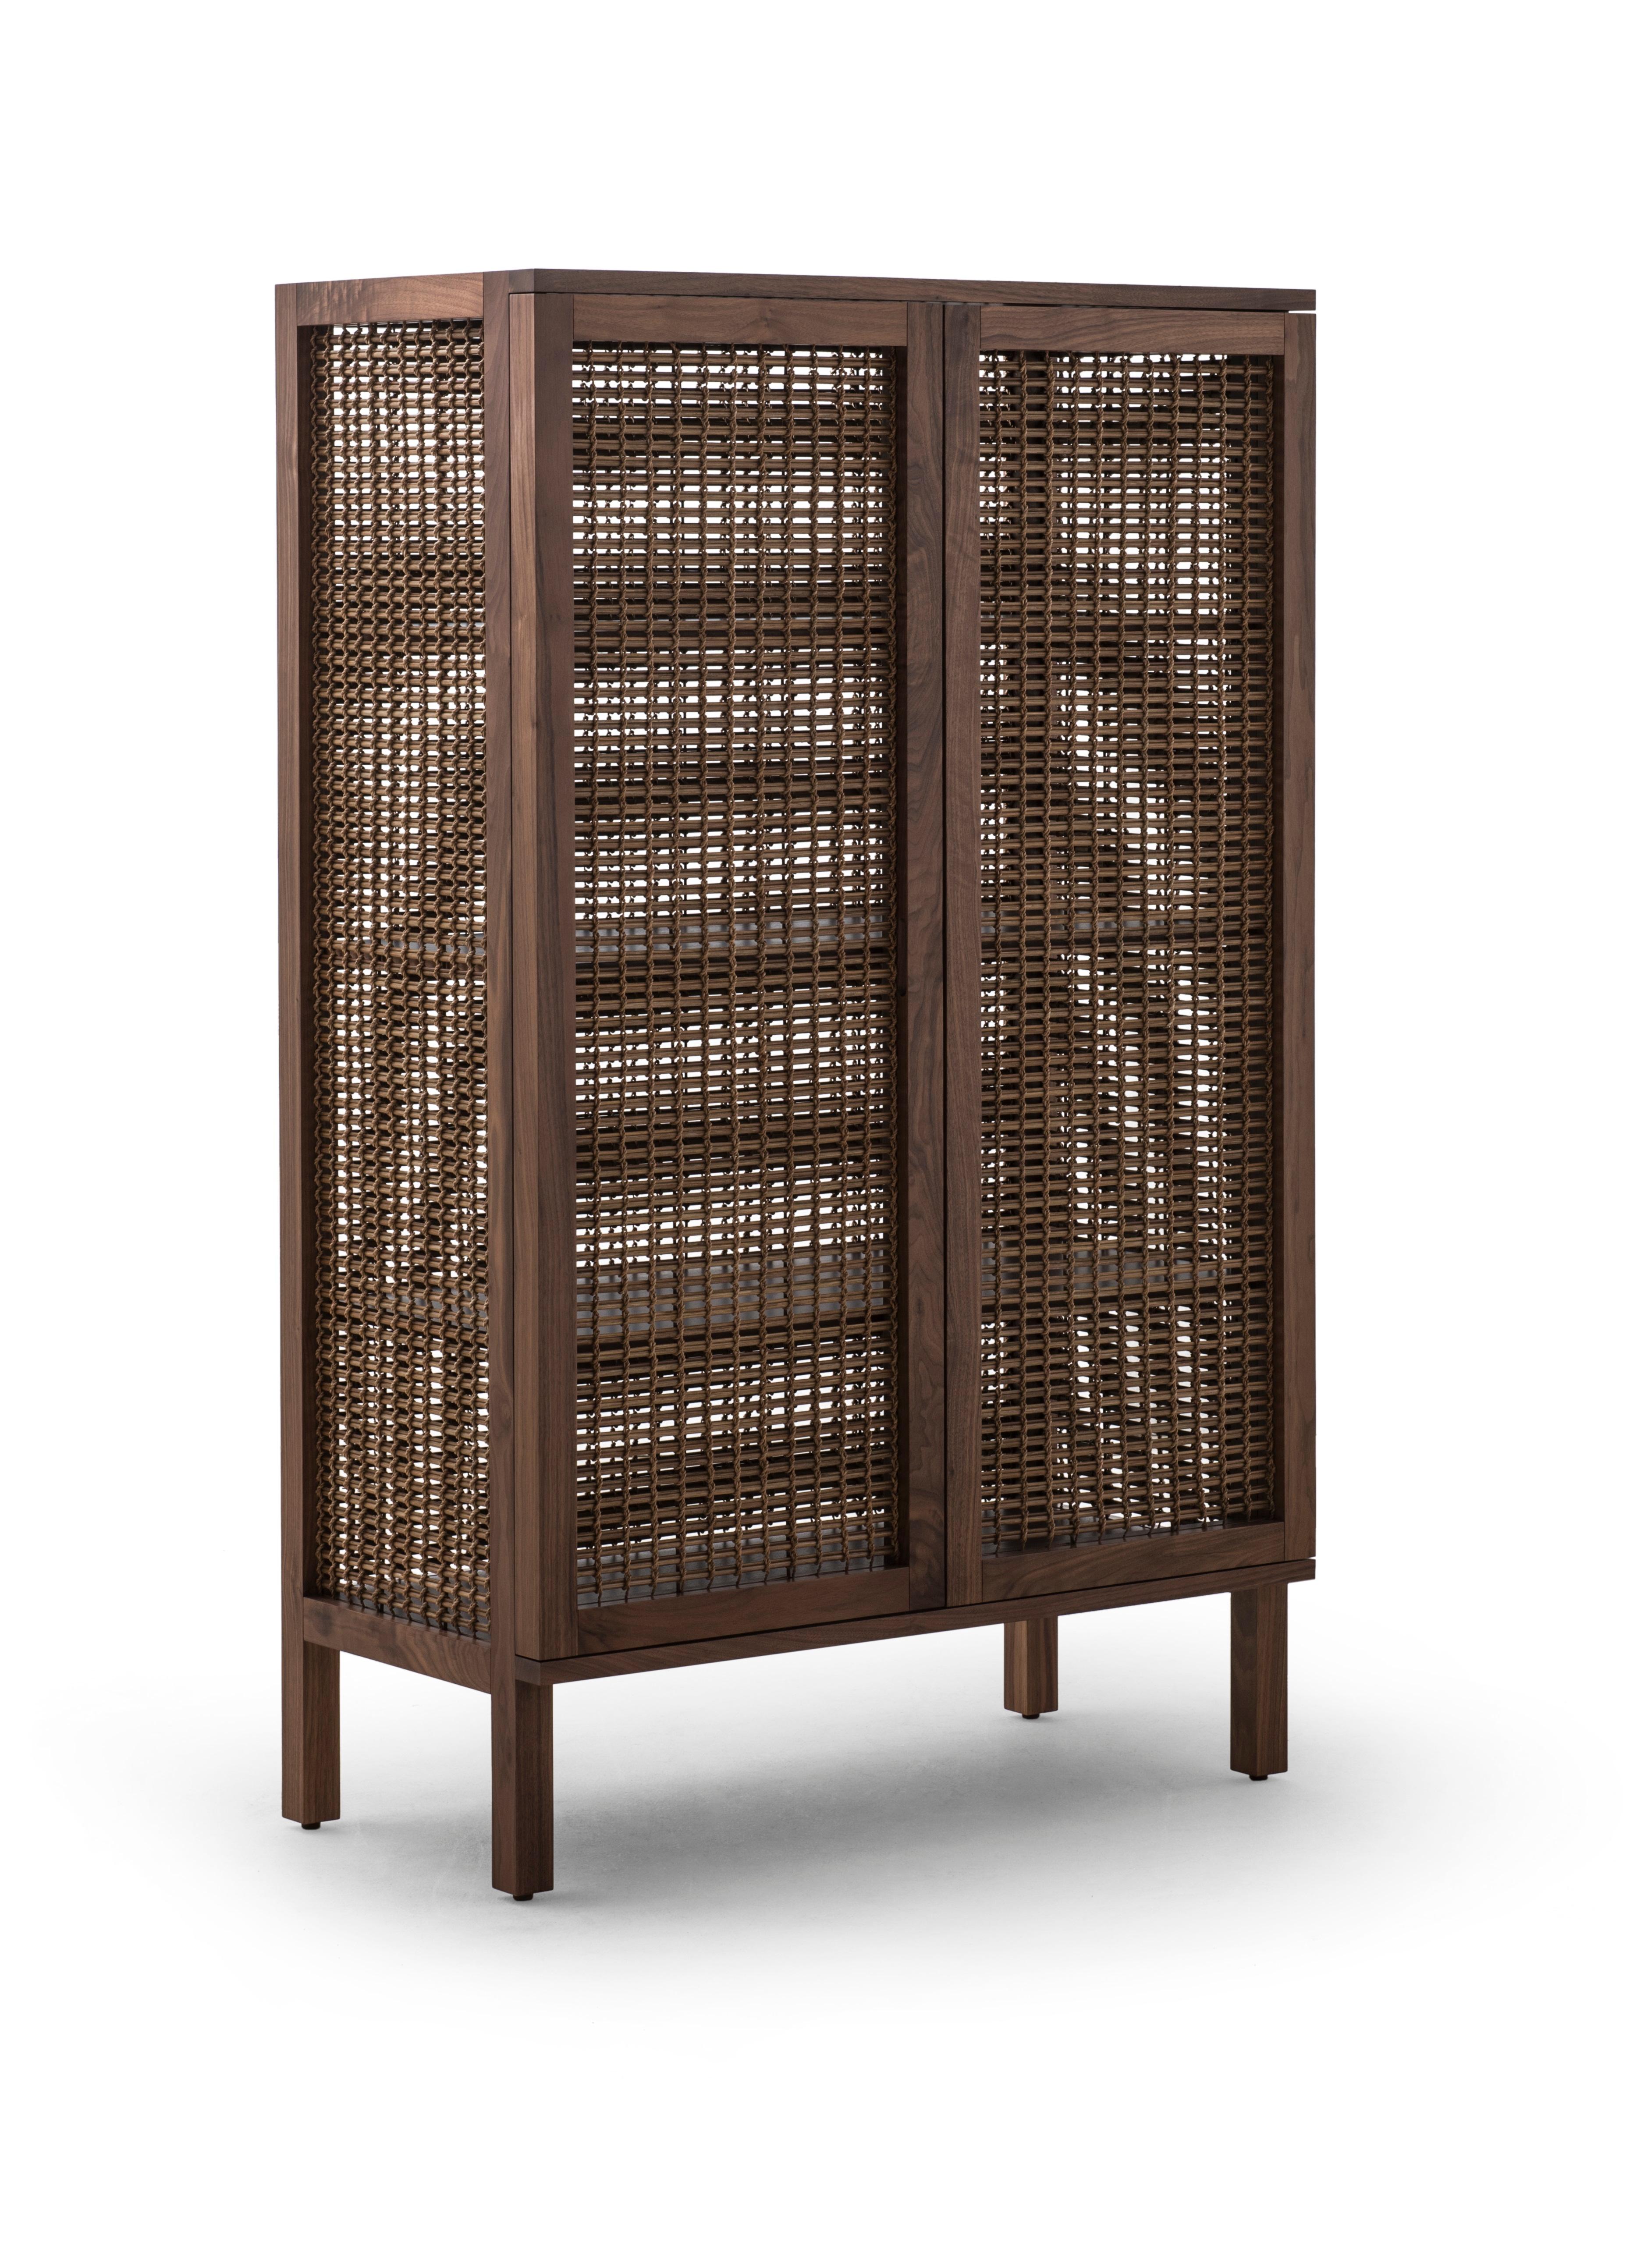 Philippine Walnut Suzy Wong Cabinet by Kenneth Cobonpue For Sale